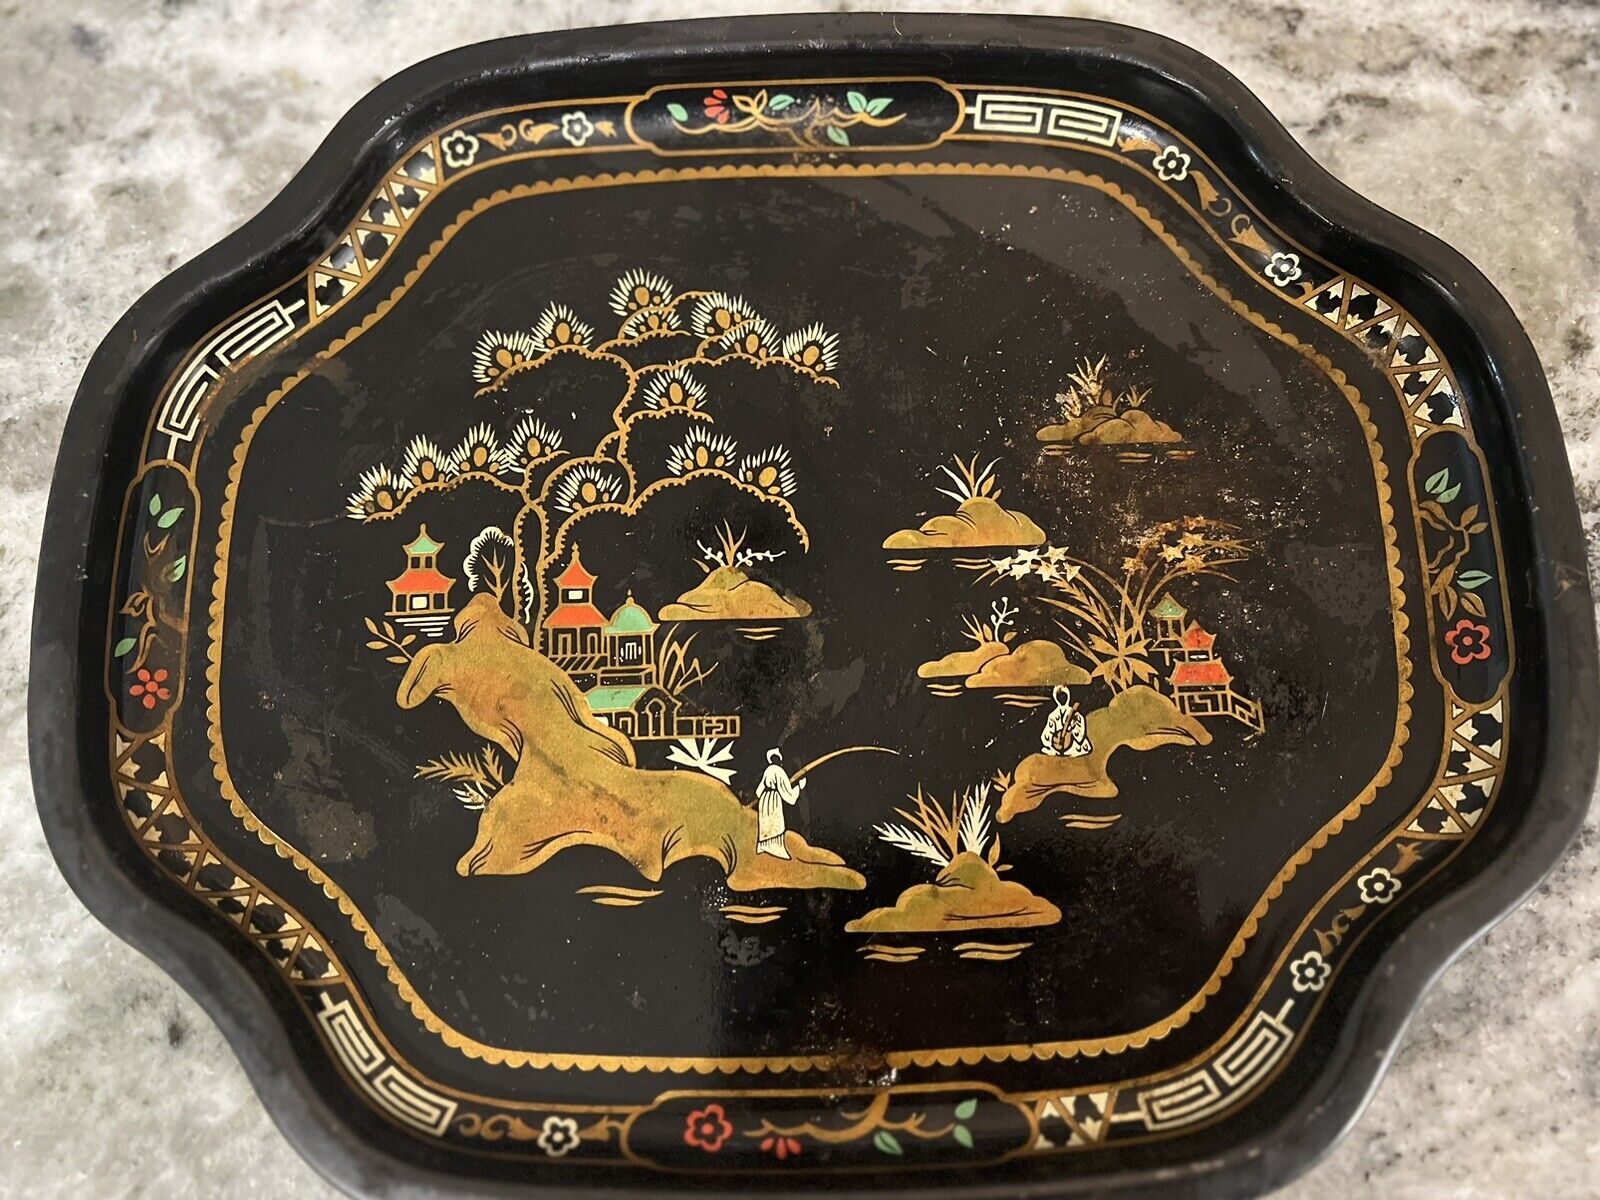 Vtg Baret Ware England Serving Tray Black Lacquer Toleware Asian Chinoiserie